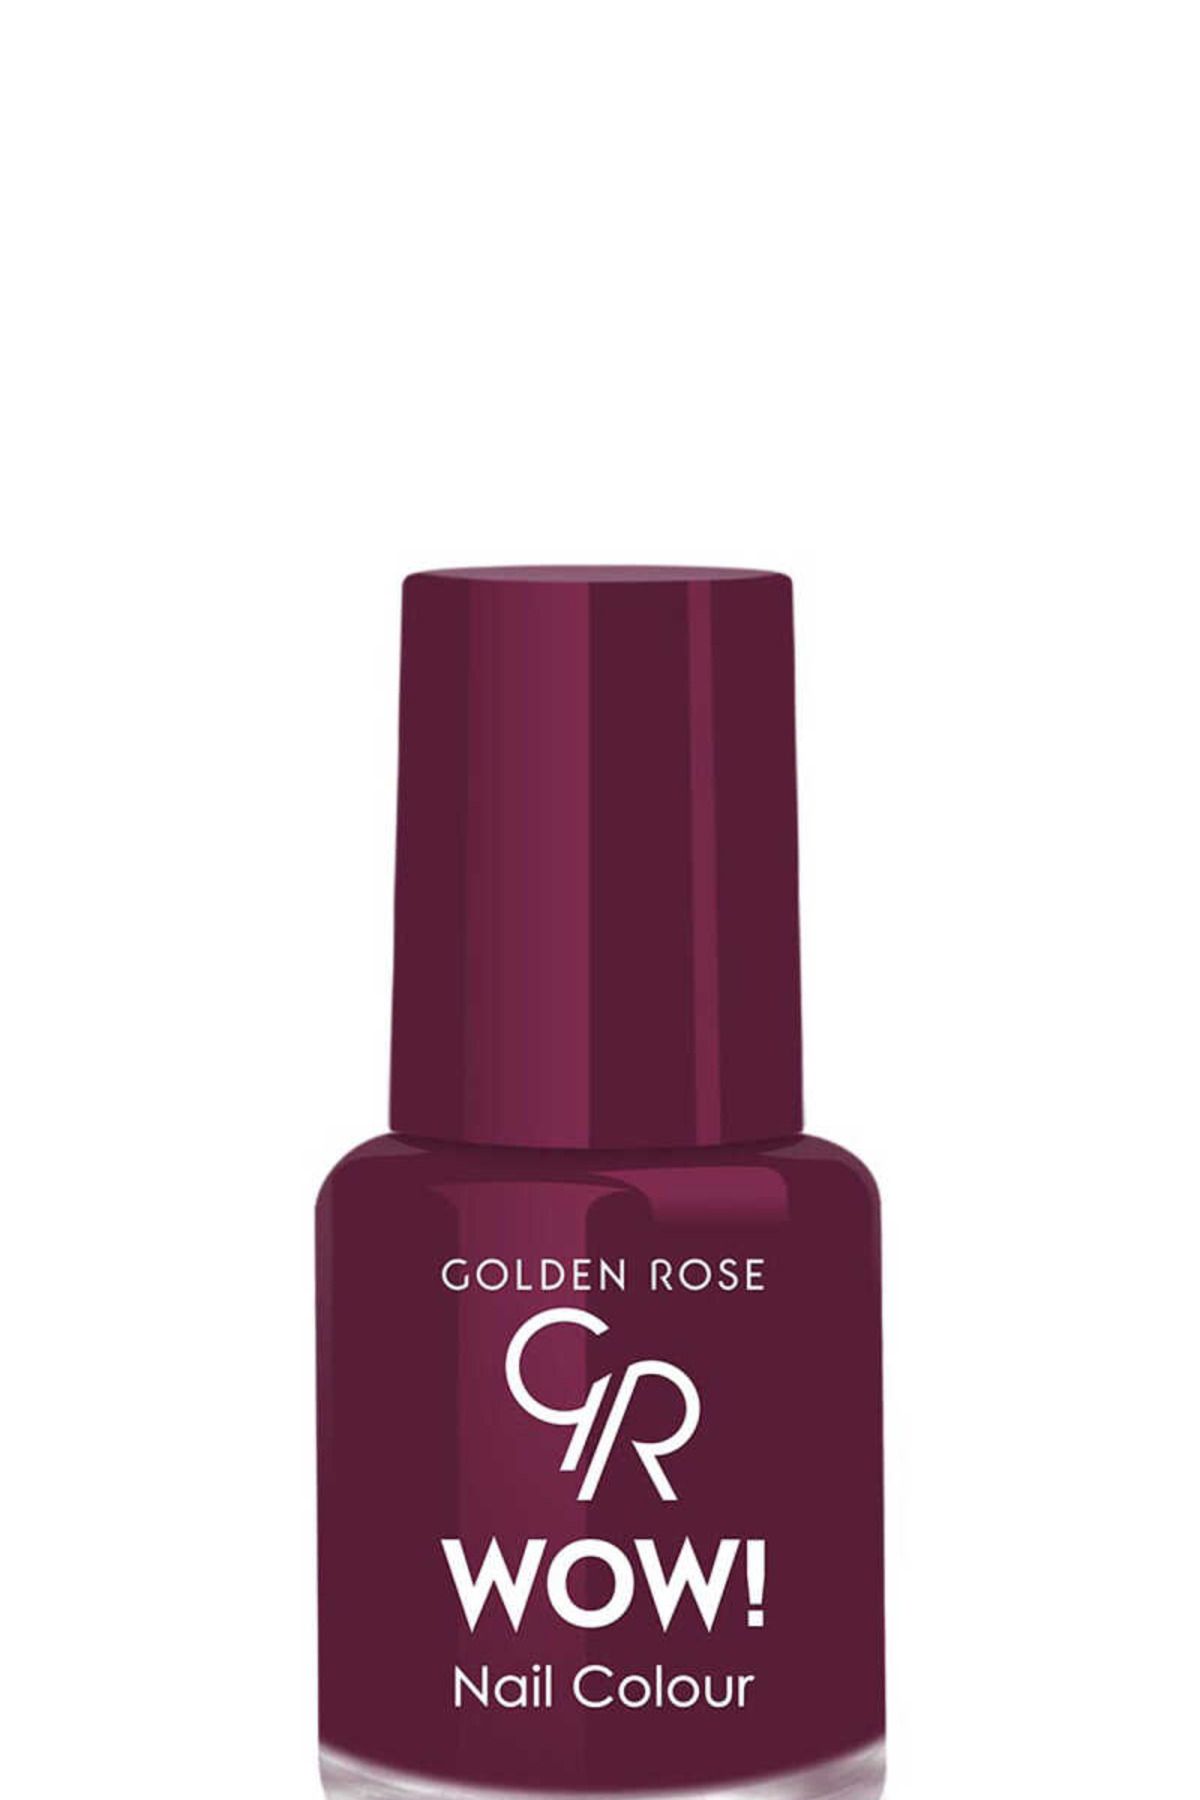 Golden Rose WoW! Nail Colour 66